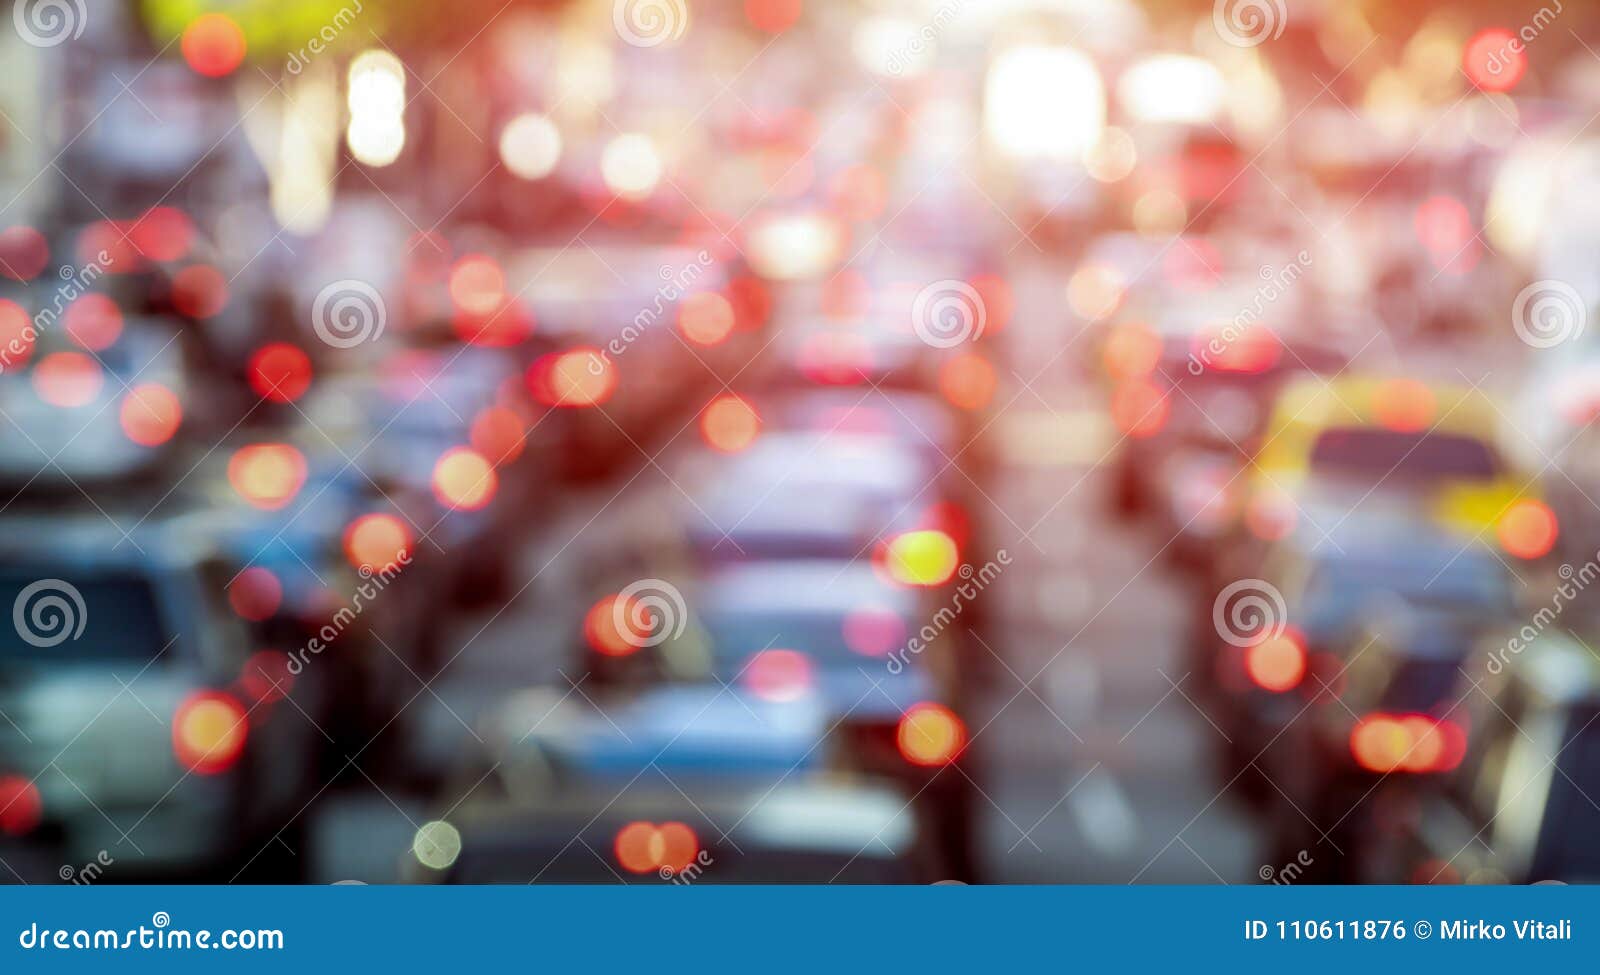 rush hour with defocused cars and generic vehicles - traffic jam